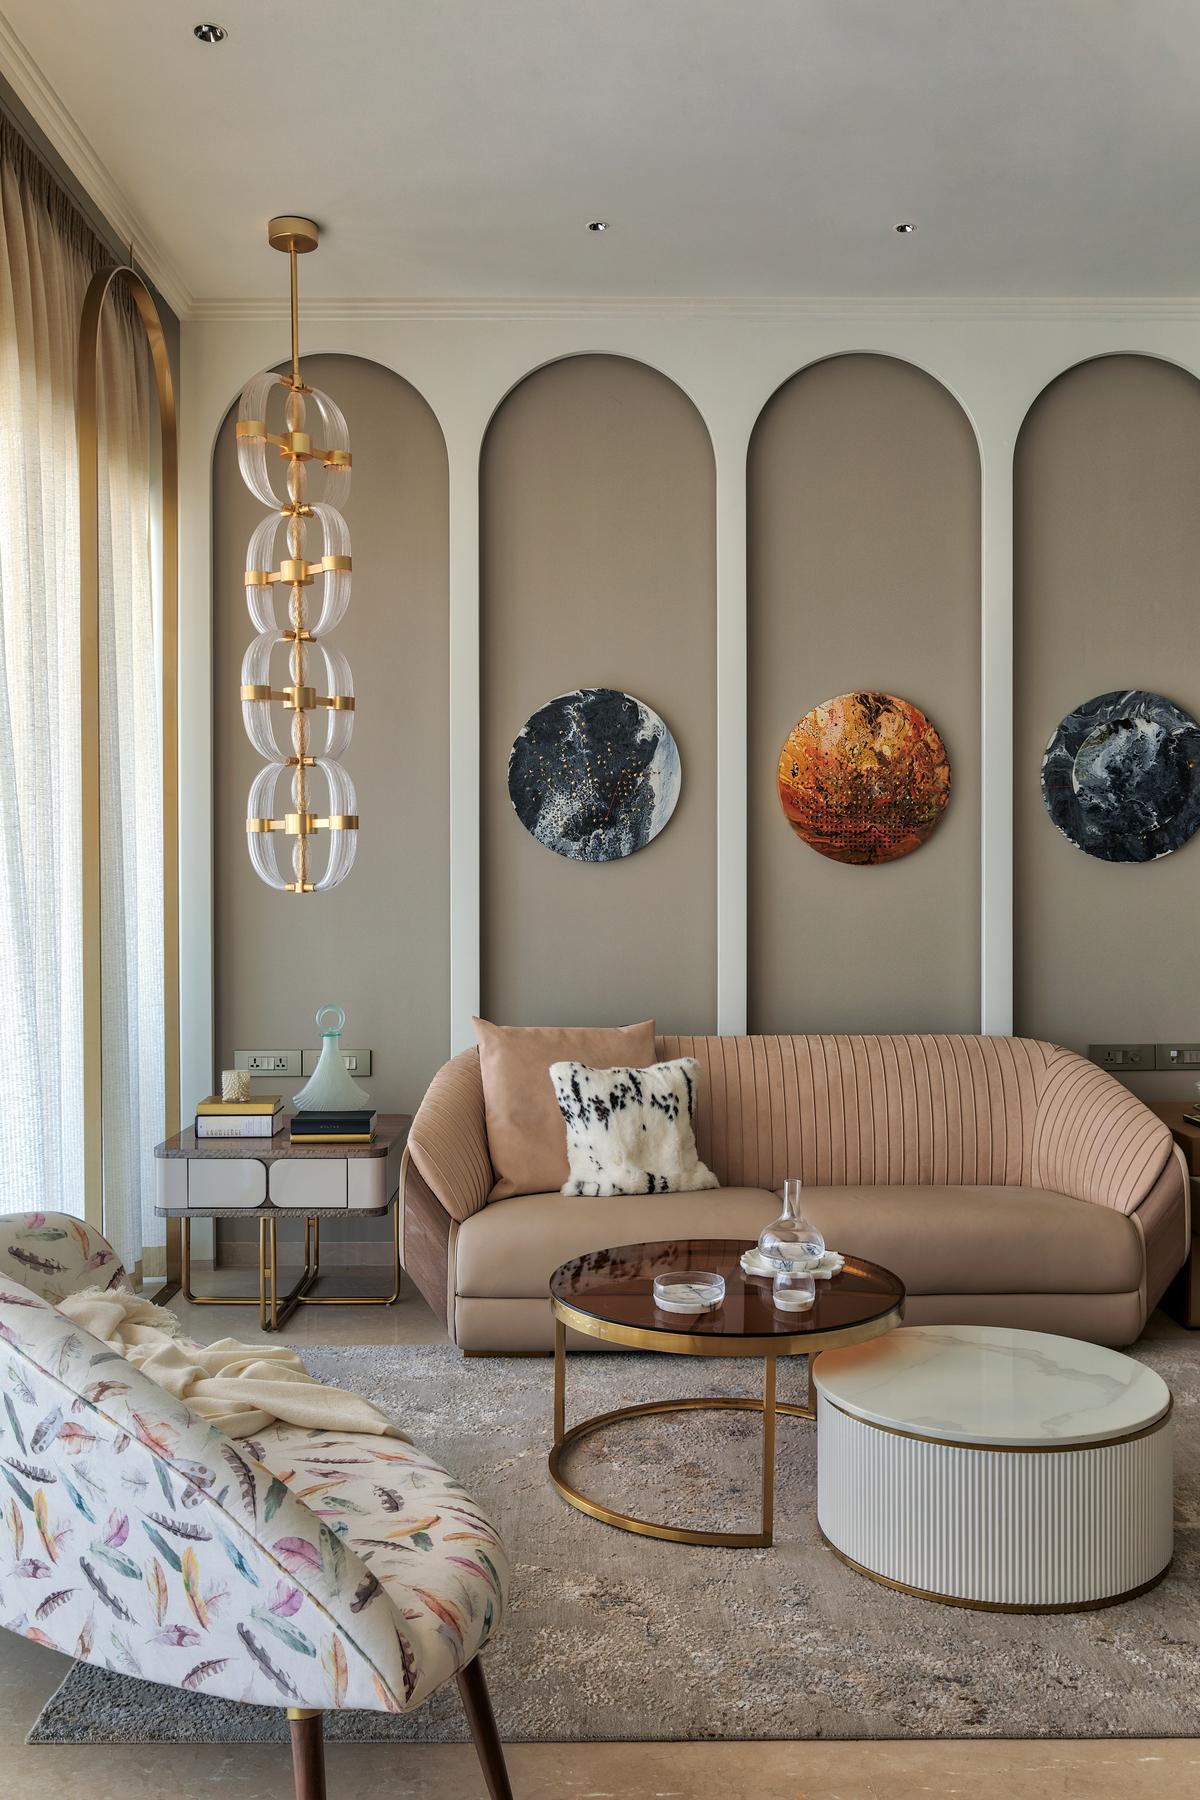 Step inside a 4,500 sq ft Mumbai home imbued with the grandeur of Jaipur palaces